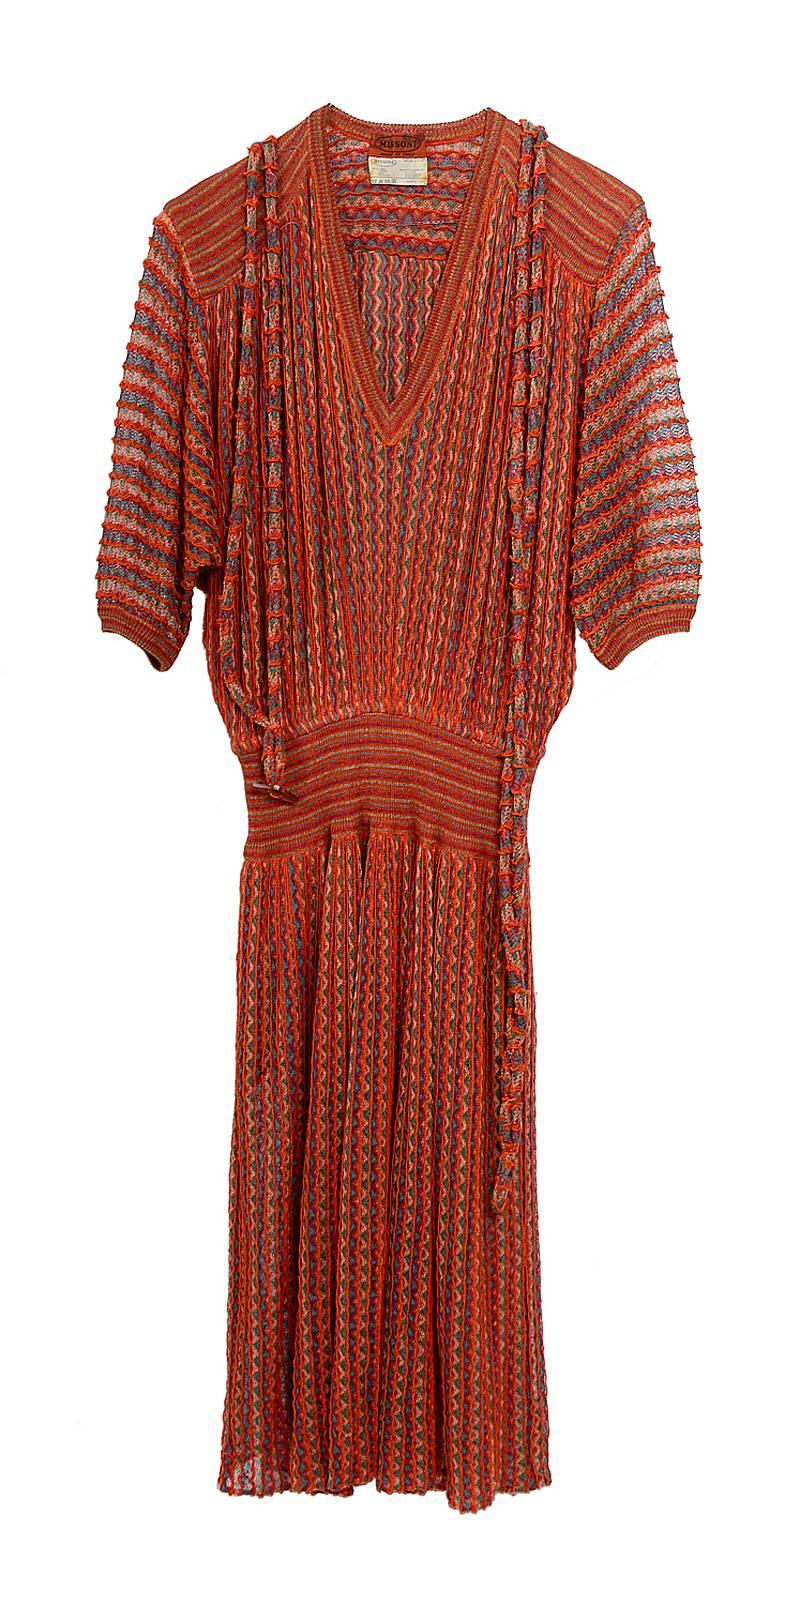 70's vintage dress by Missoni.
Comes with a belt
In excellent pre-worn condition - unlined - Mix 60%linen & 40%nylon - Batwing sleeves 
Measurements taken flat: Sh to Sh  19inch/48cm - Ua to Ua Free - Waist un stretched 13inch/33cm - Hip Free